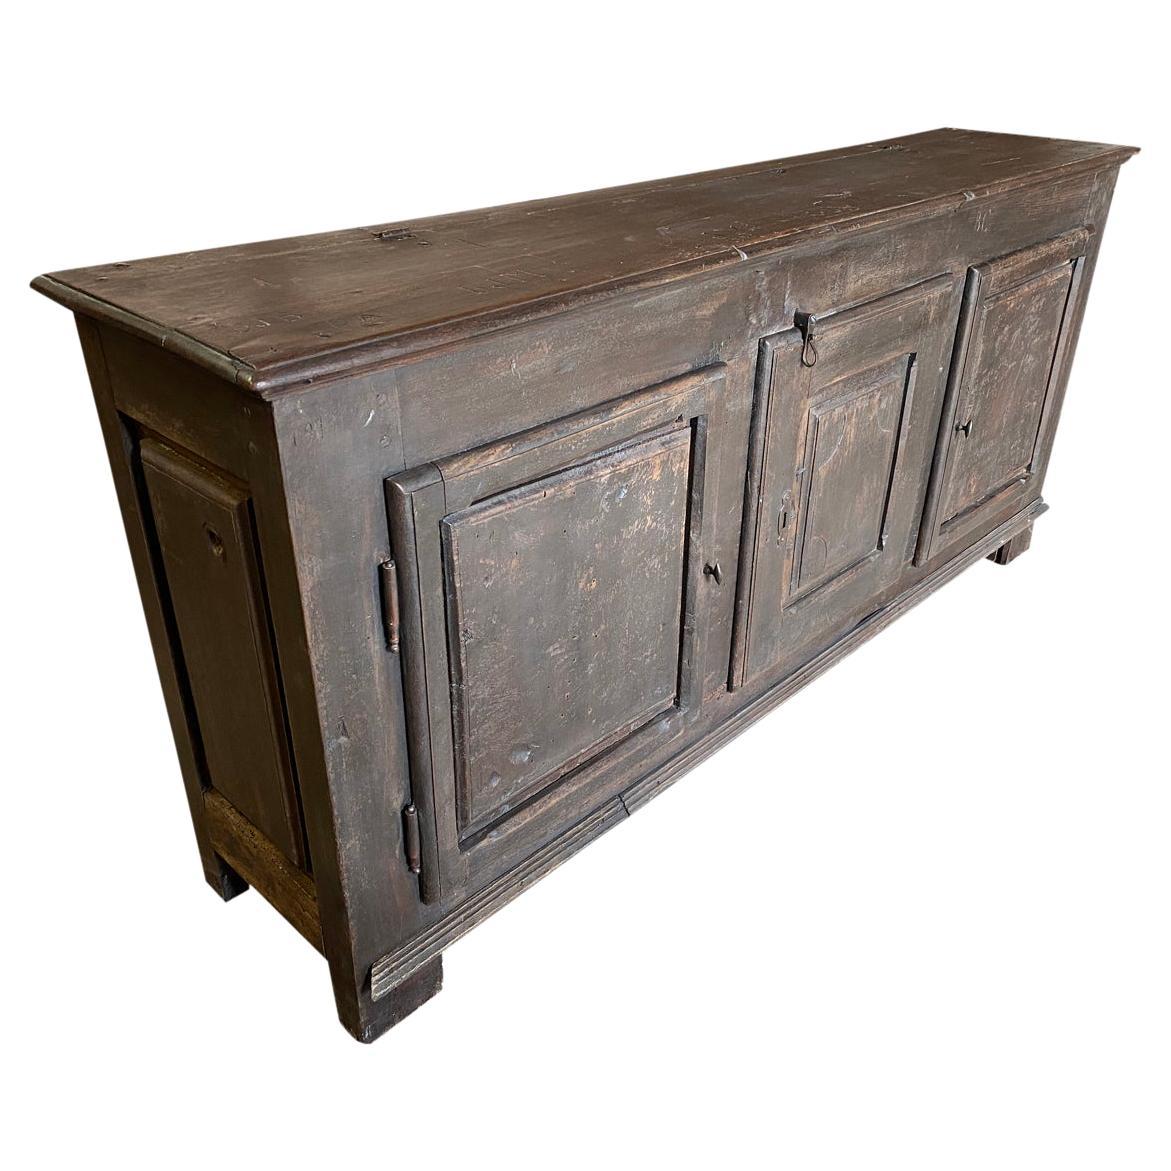 A very striking early 19th century Buffet from the Provence region of France. Soundly constructed from painted wood with 3 doors, molded door panels resting on block feet. There are charming inscriptions carved of the top surface from a later period